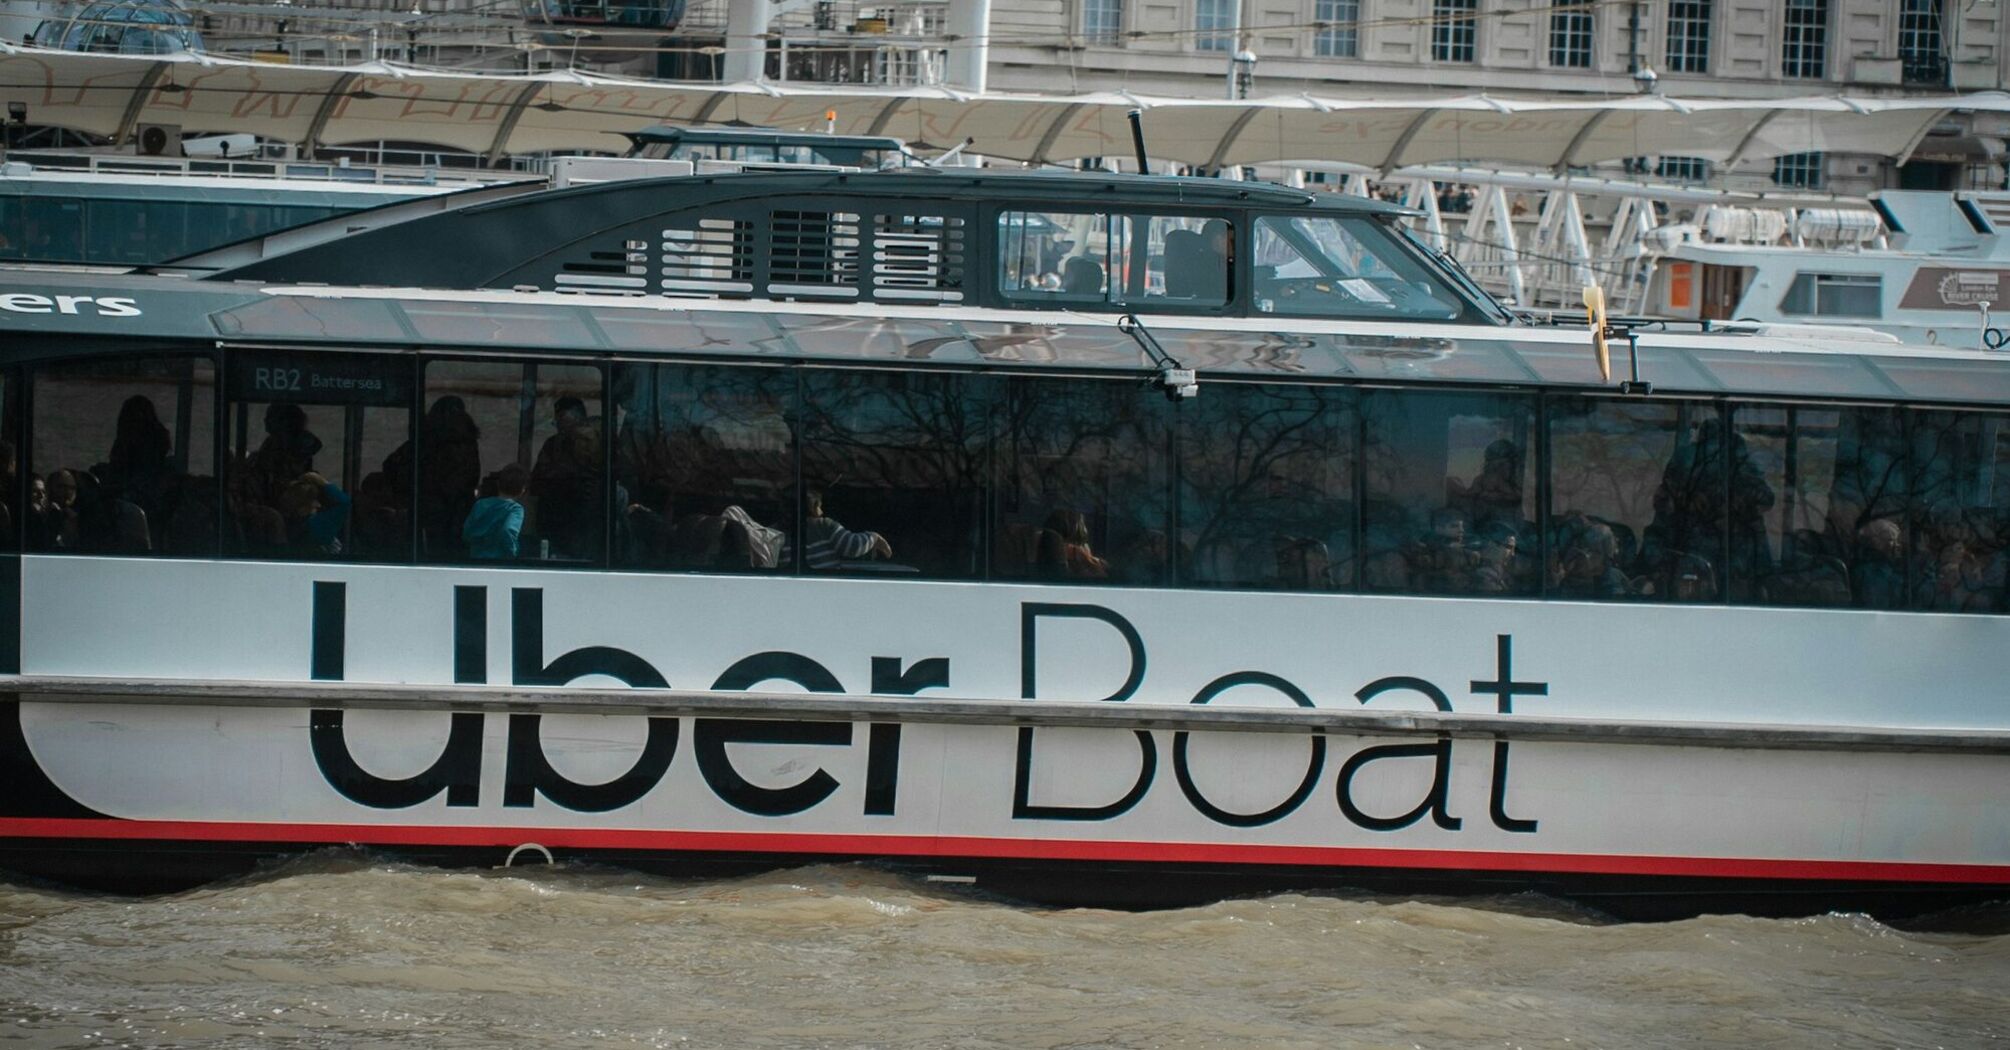 Uber Boat by Thames Clippers on the River Thames